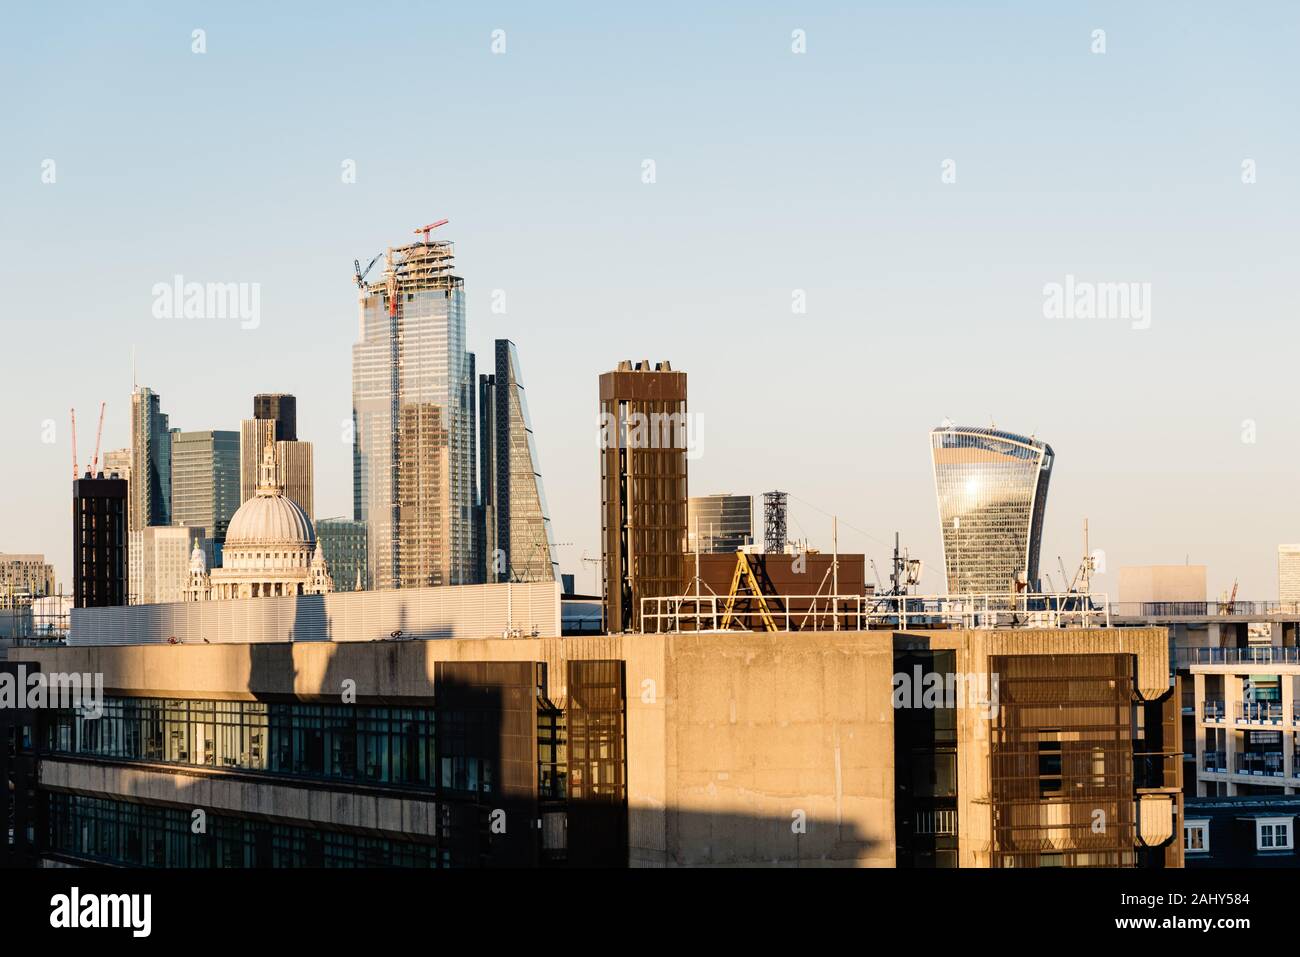 Cityscape of the City of London. High angle view a sunny day at sunset. Stock Photo